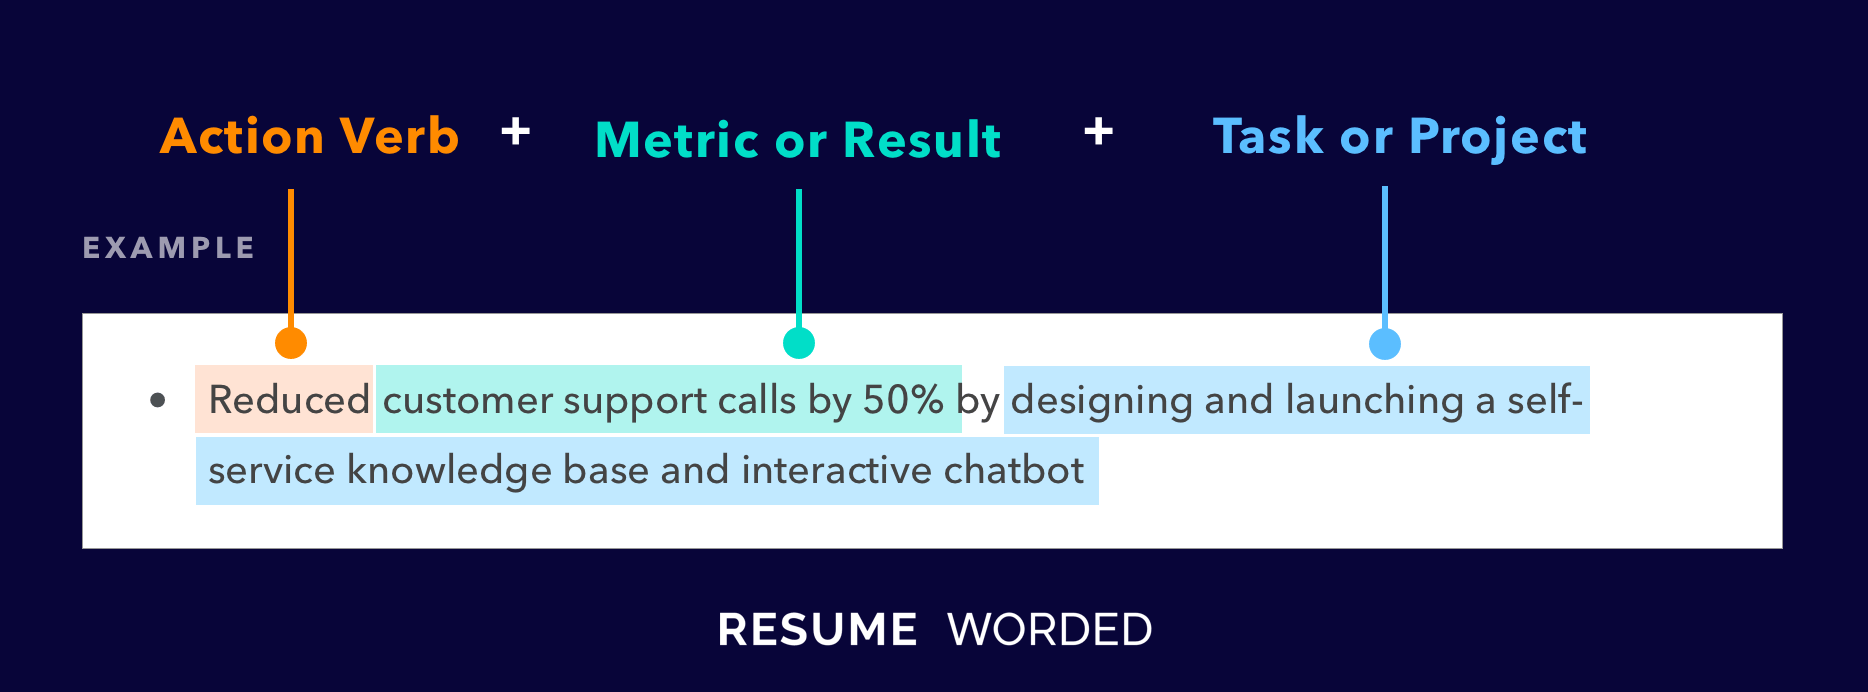 Use metrics to quantify the impact of your work on the bottom line. - Continuous Improvement Specialist Resume